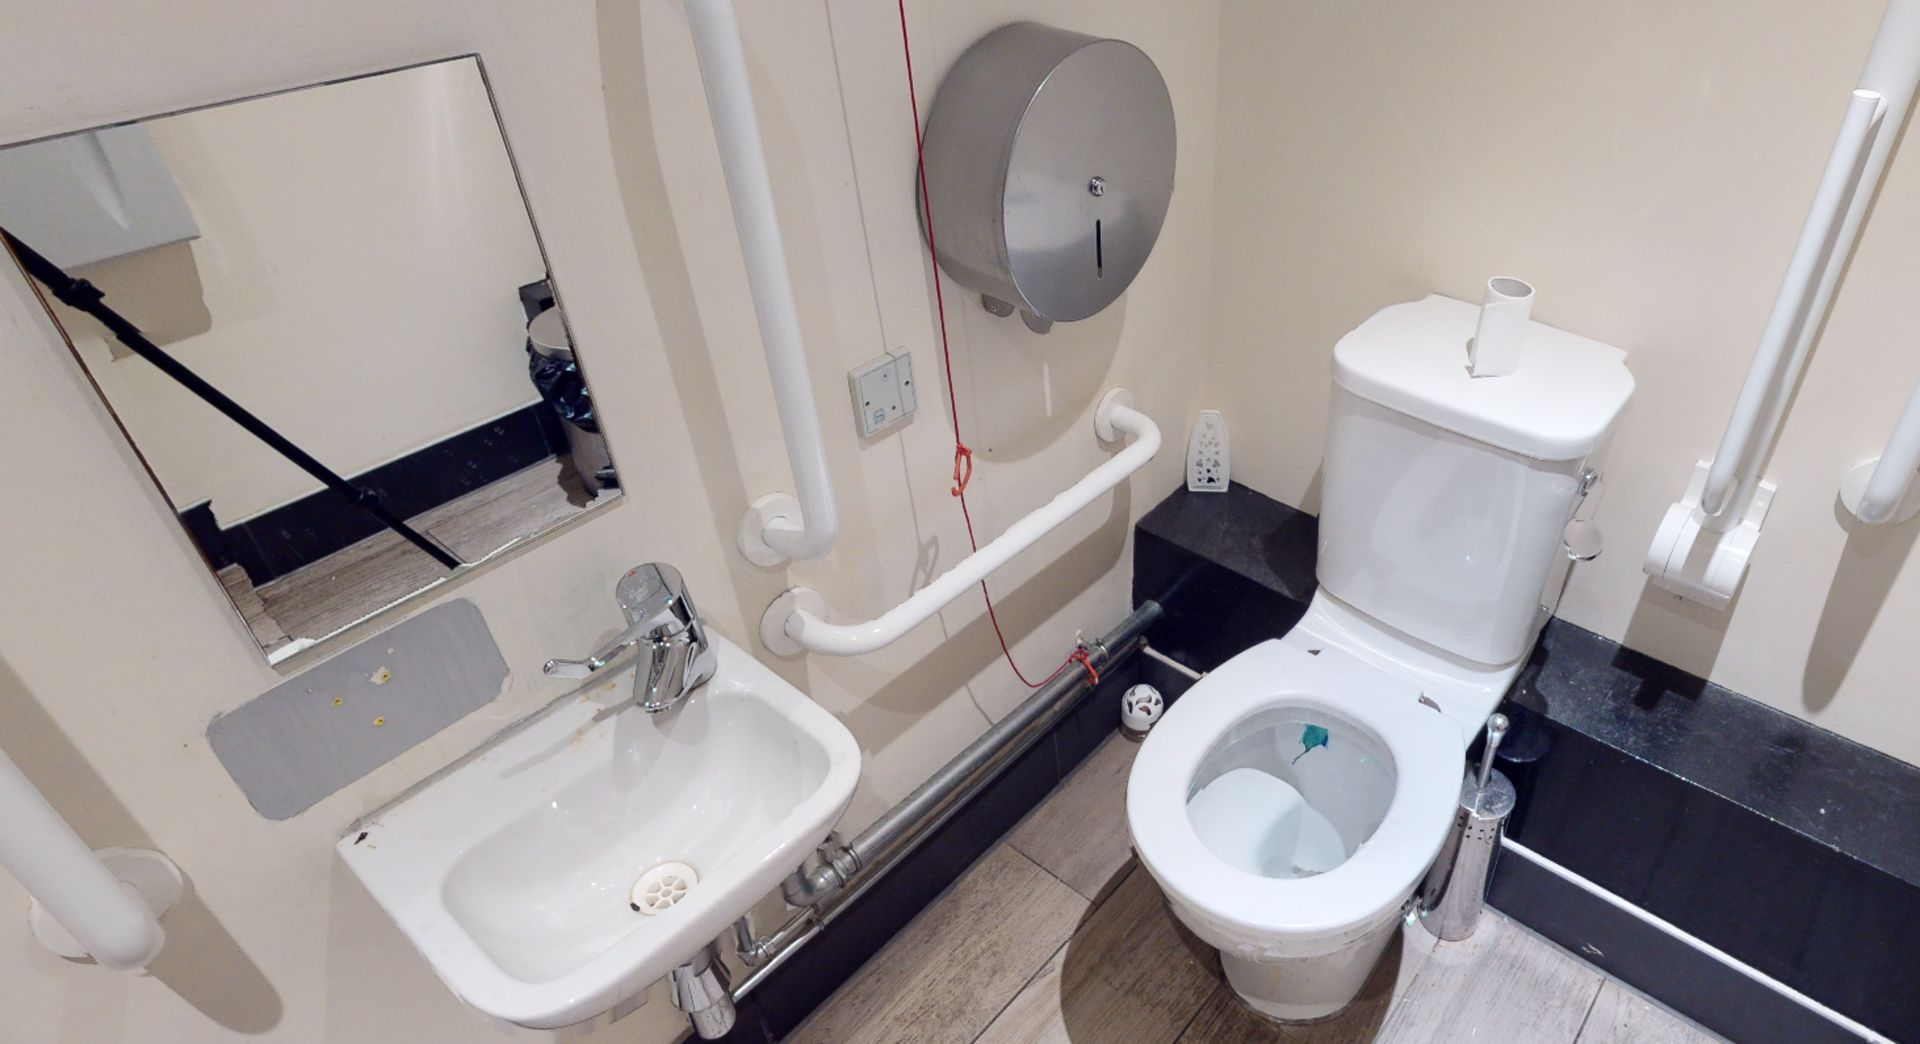 1 x Disabled Toilet Suite - Includes Toilet, Wall Mounted Hand Wash Basin With Mixer Tap, Pedal Bin, - Image 3 of 3